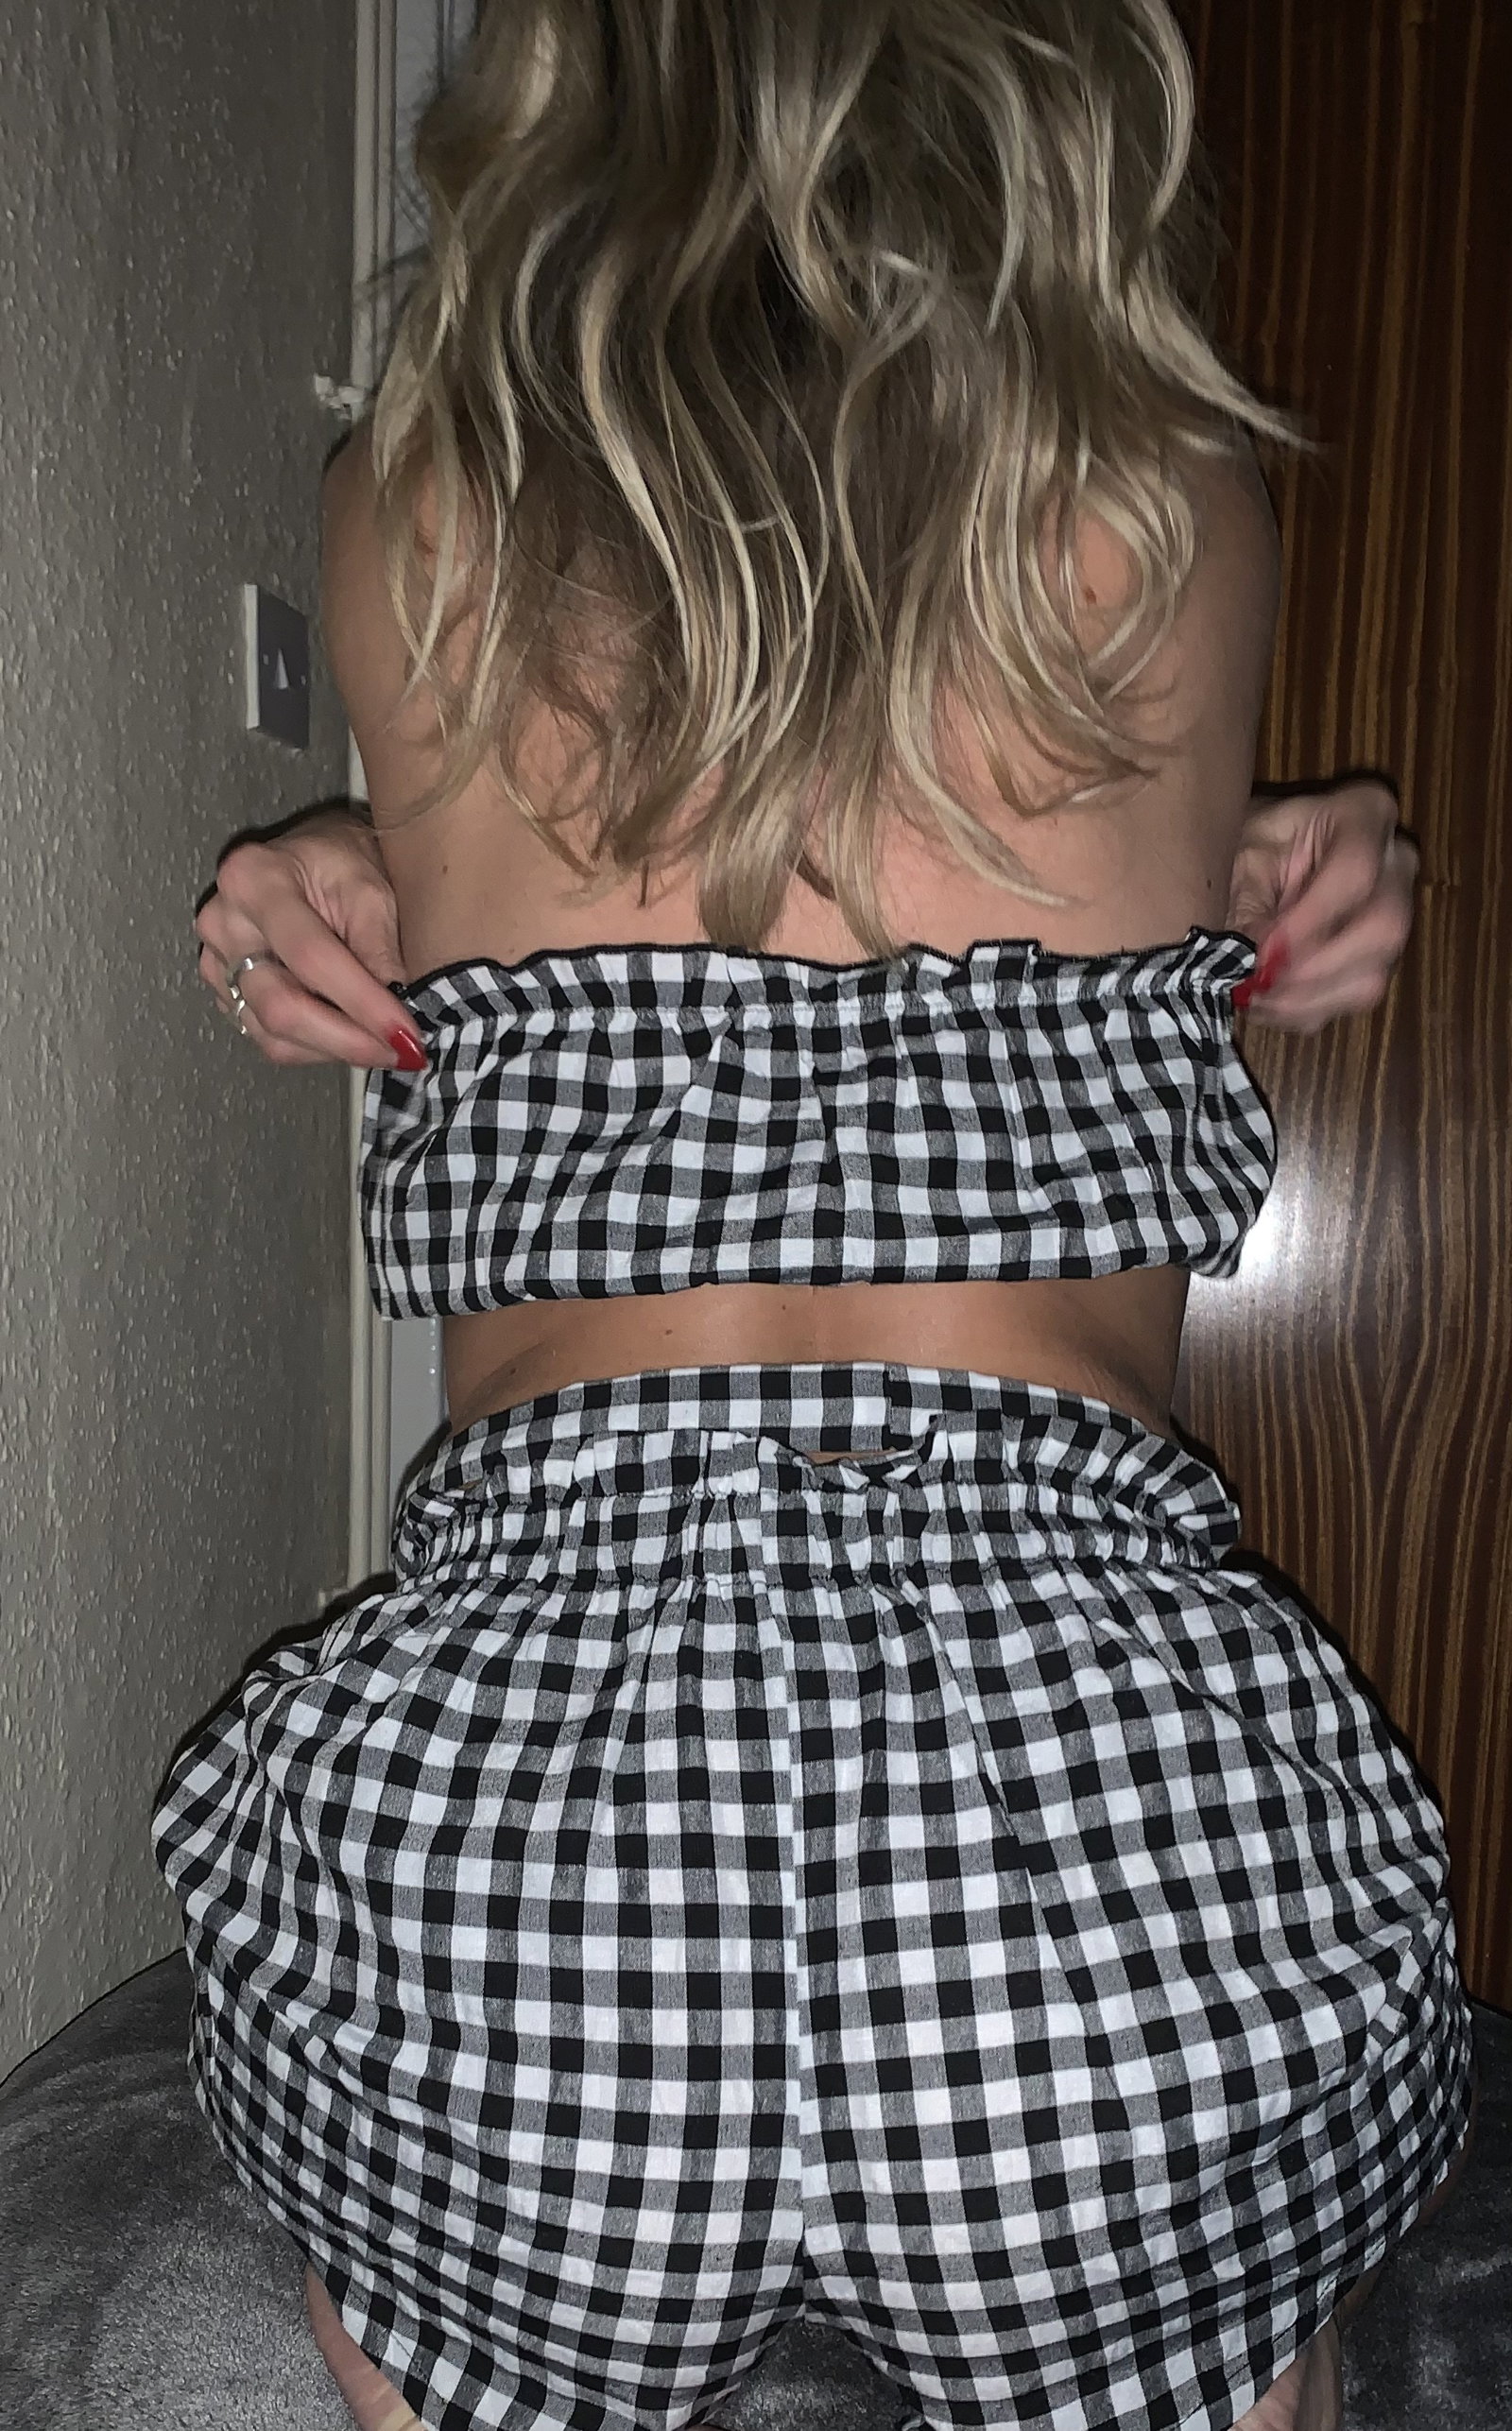 Photo by Kimthemilf with the username @Kimthemilf, who is a verified user,  January 1, 2021 at 8:08 PM. The post is about the topic MILF and the text says 'Hope you guys like tonights outfit??'